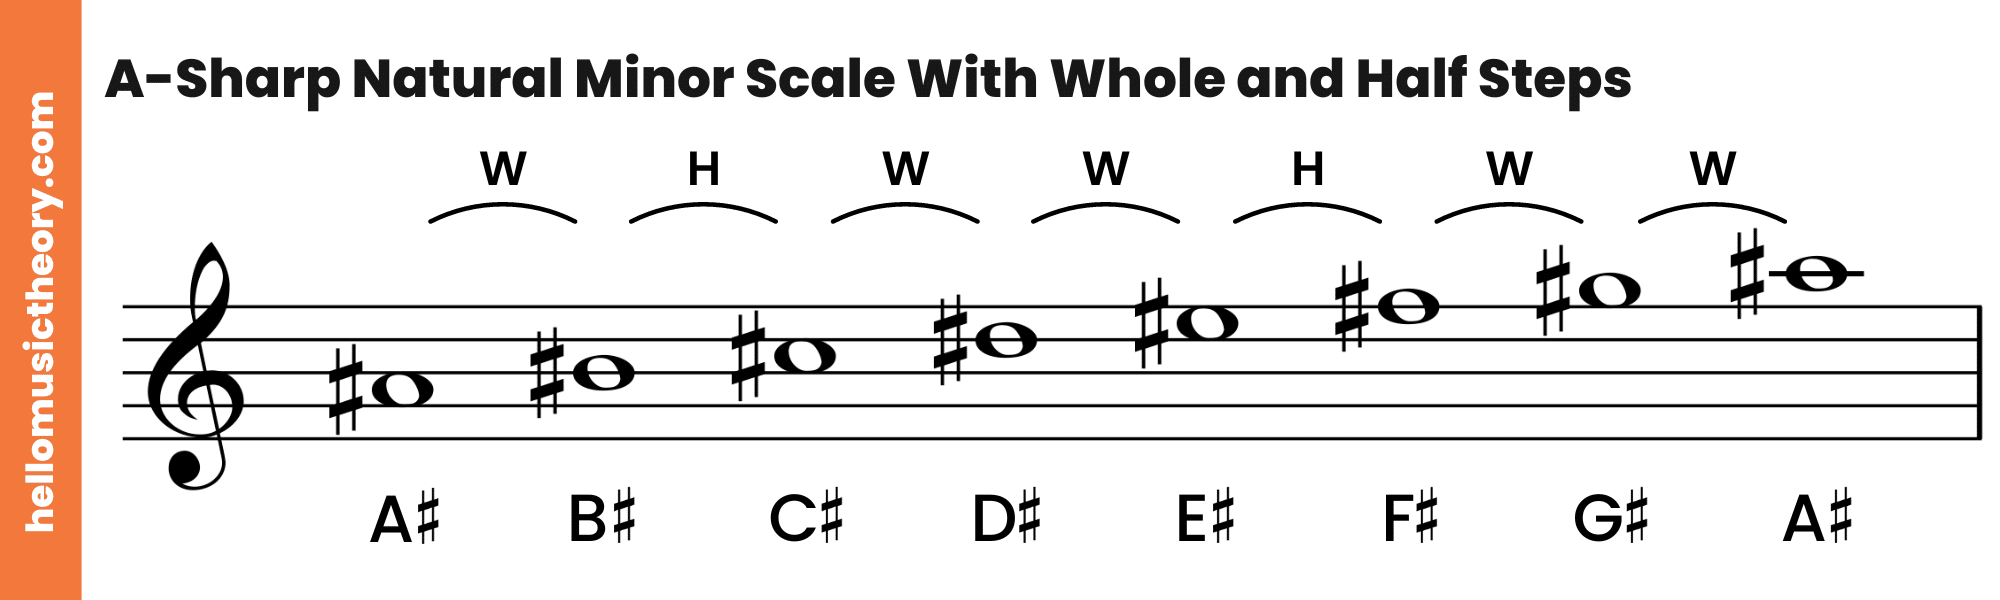 A-Sharp Natural Minor Scale Treble Clef Ascending With Whole and Half Steps